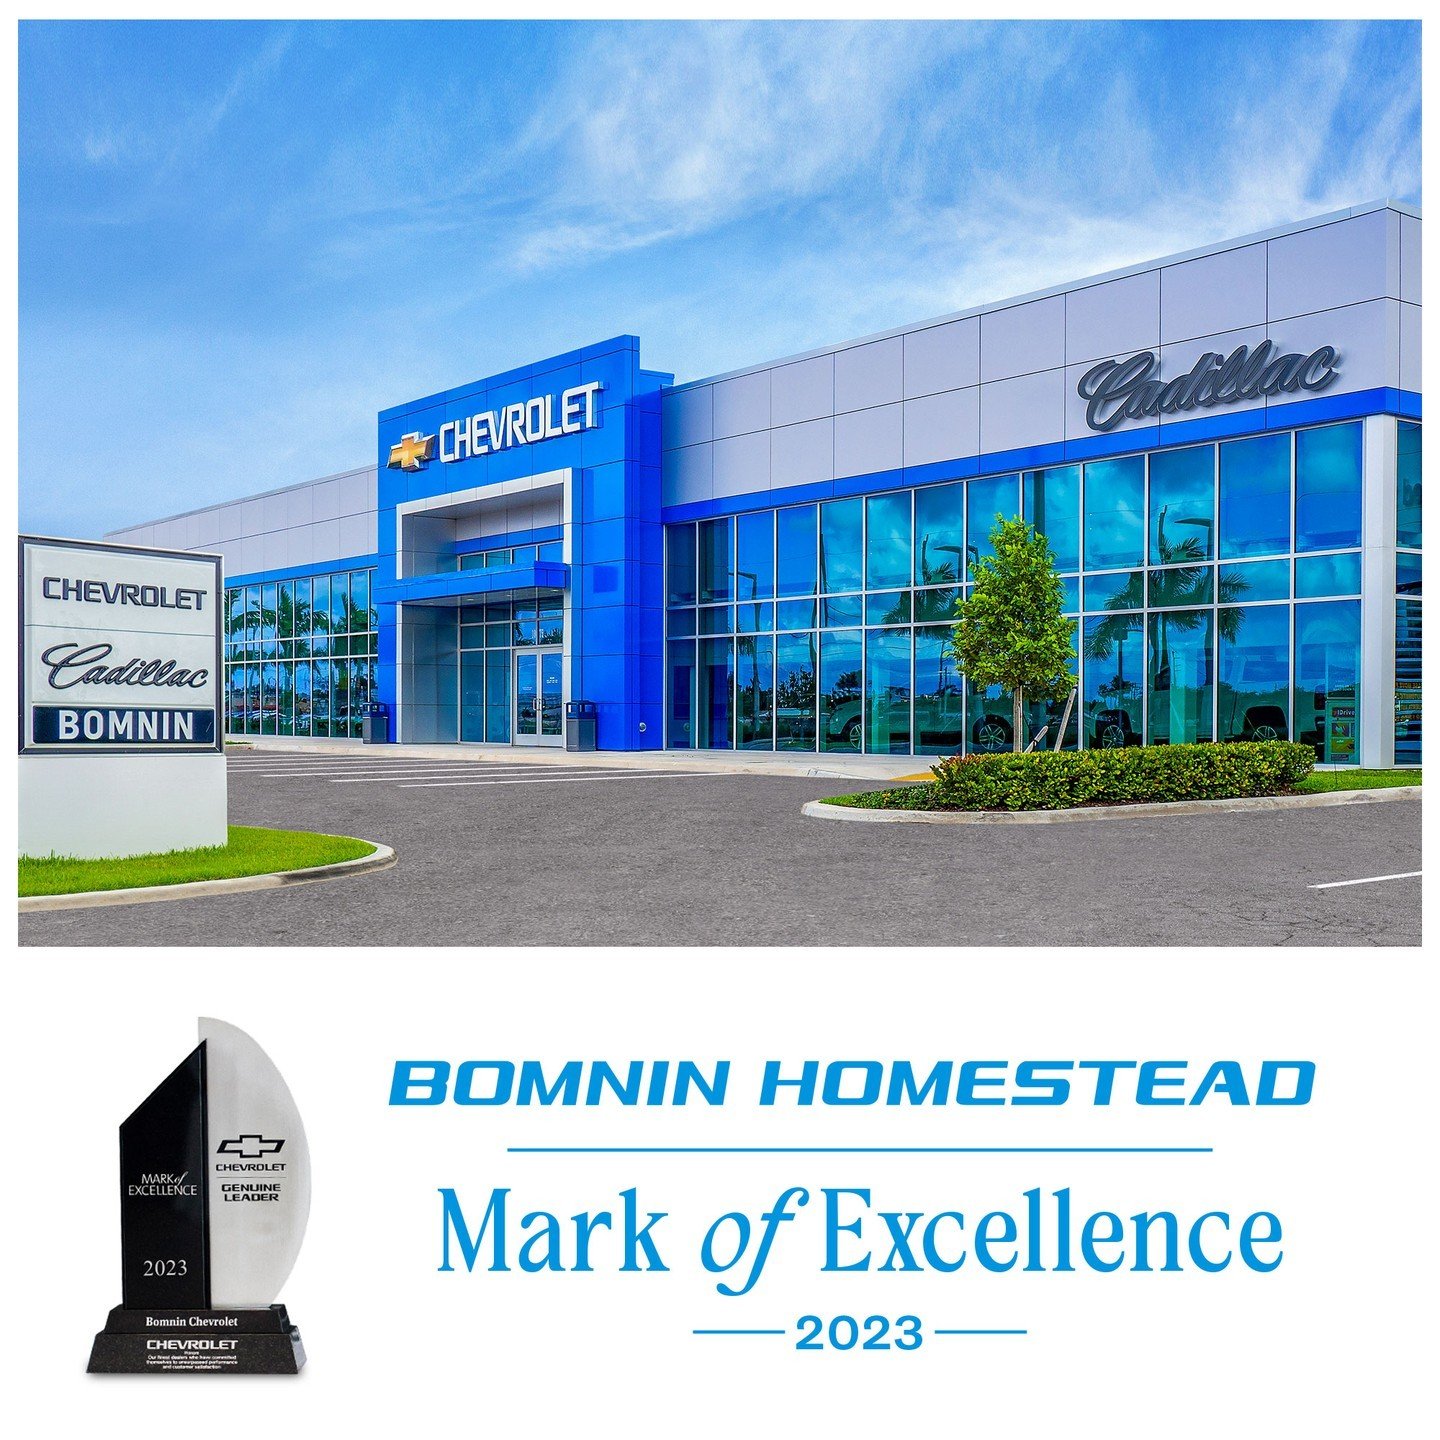 Celebrating success at at Bomnin Chevrolet Homestead! We're thrilled to receive the prestigious 2023 Mark of Excellence award, highlighting our dedication to delivering exceptional service and exceeding customer expectations.

Big thanks to our outst